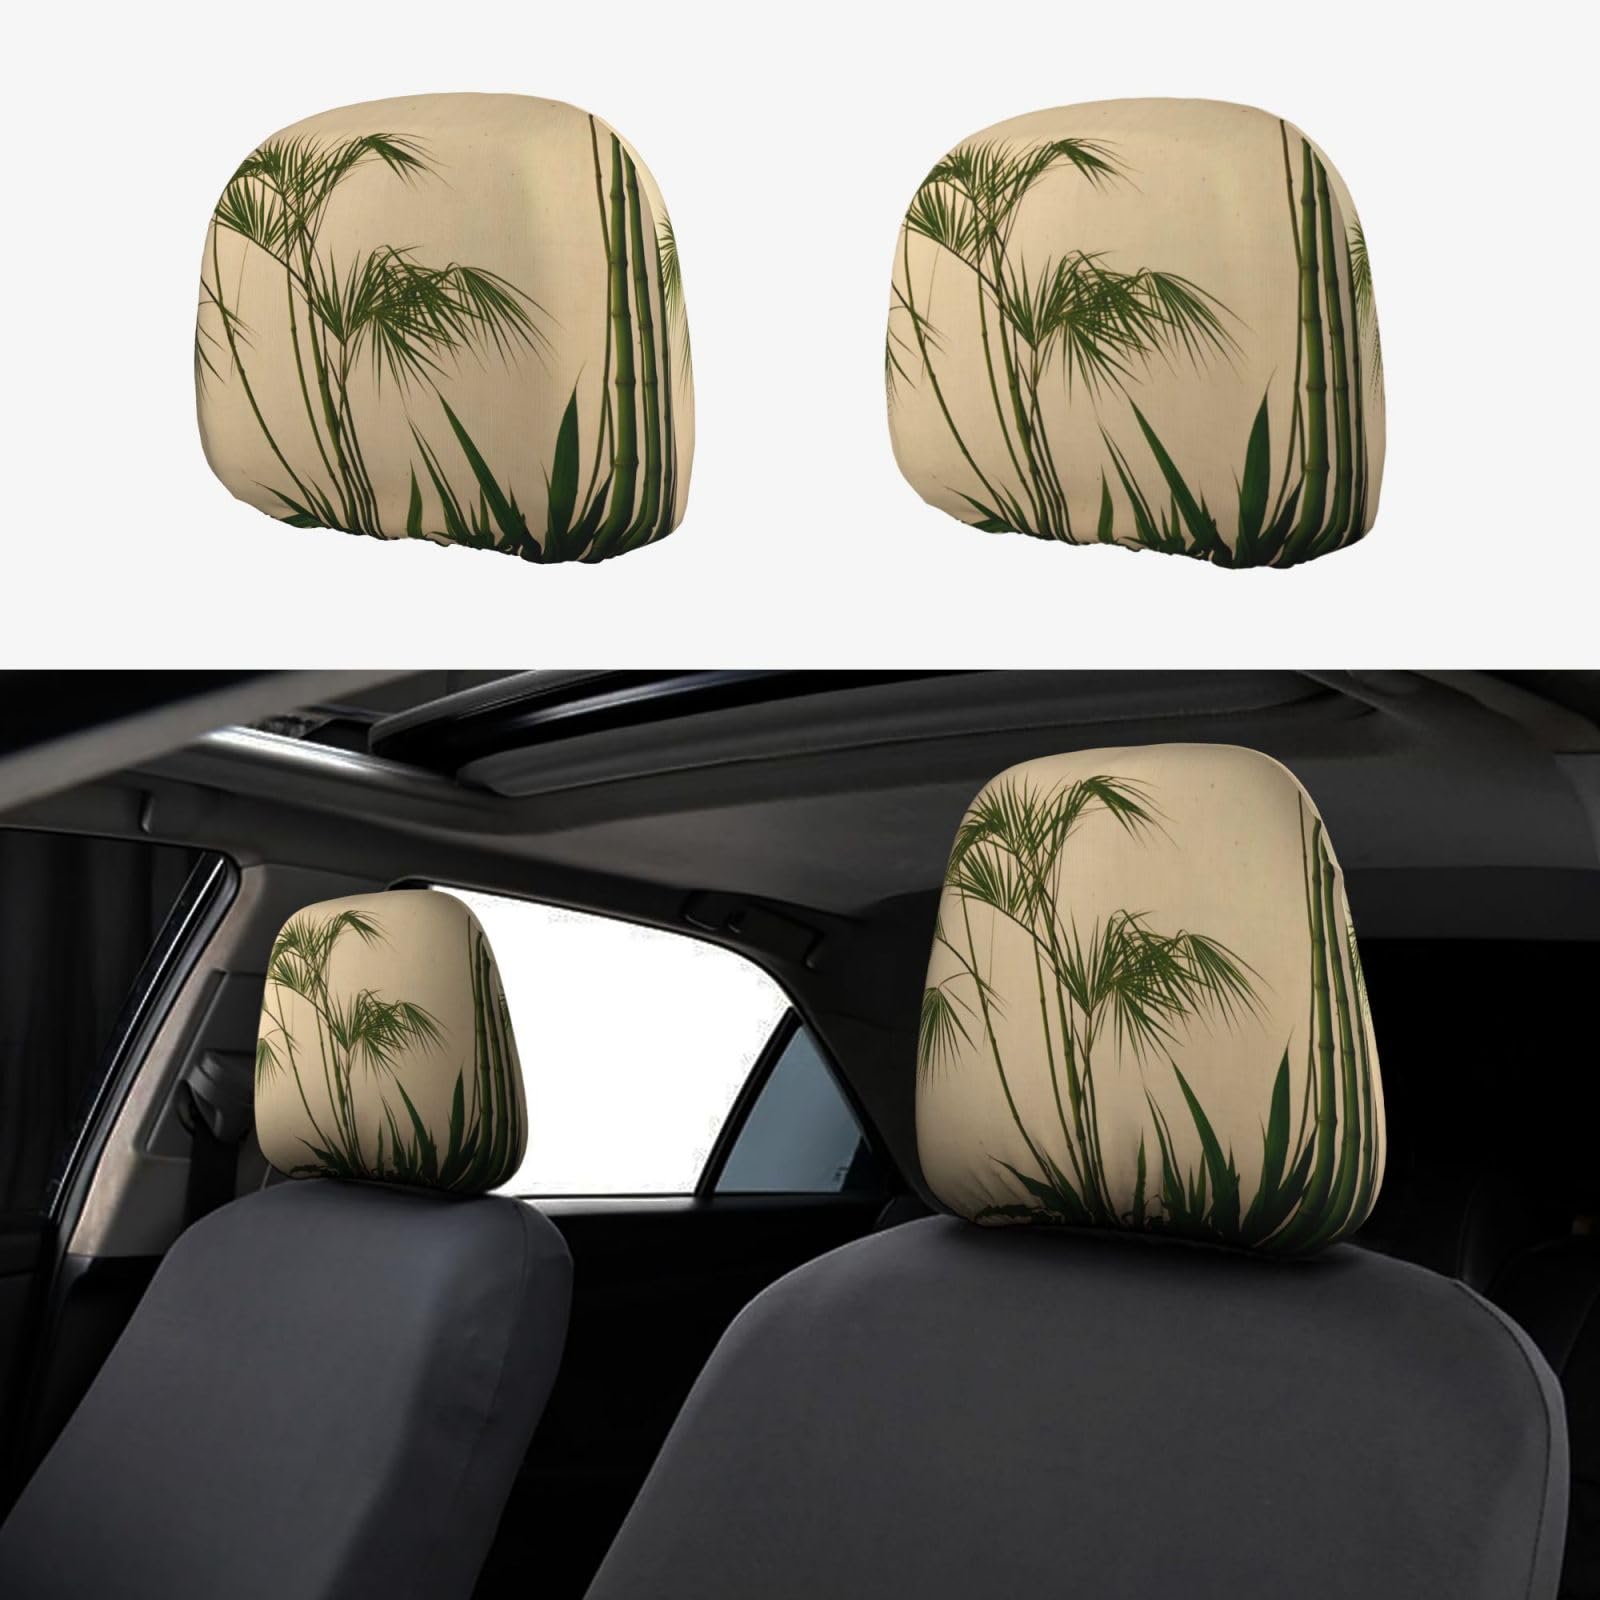 PHAYAH Clump Of Bamboo Patterned Car Seat Headrest Cover Protector Universal Car Seat Accessory 2-teiliges Set, passend für Limousine, SUV, LKW von PHAYAH